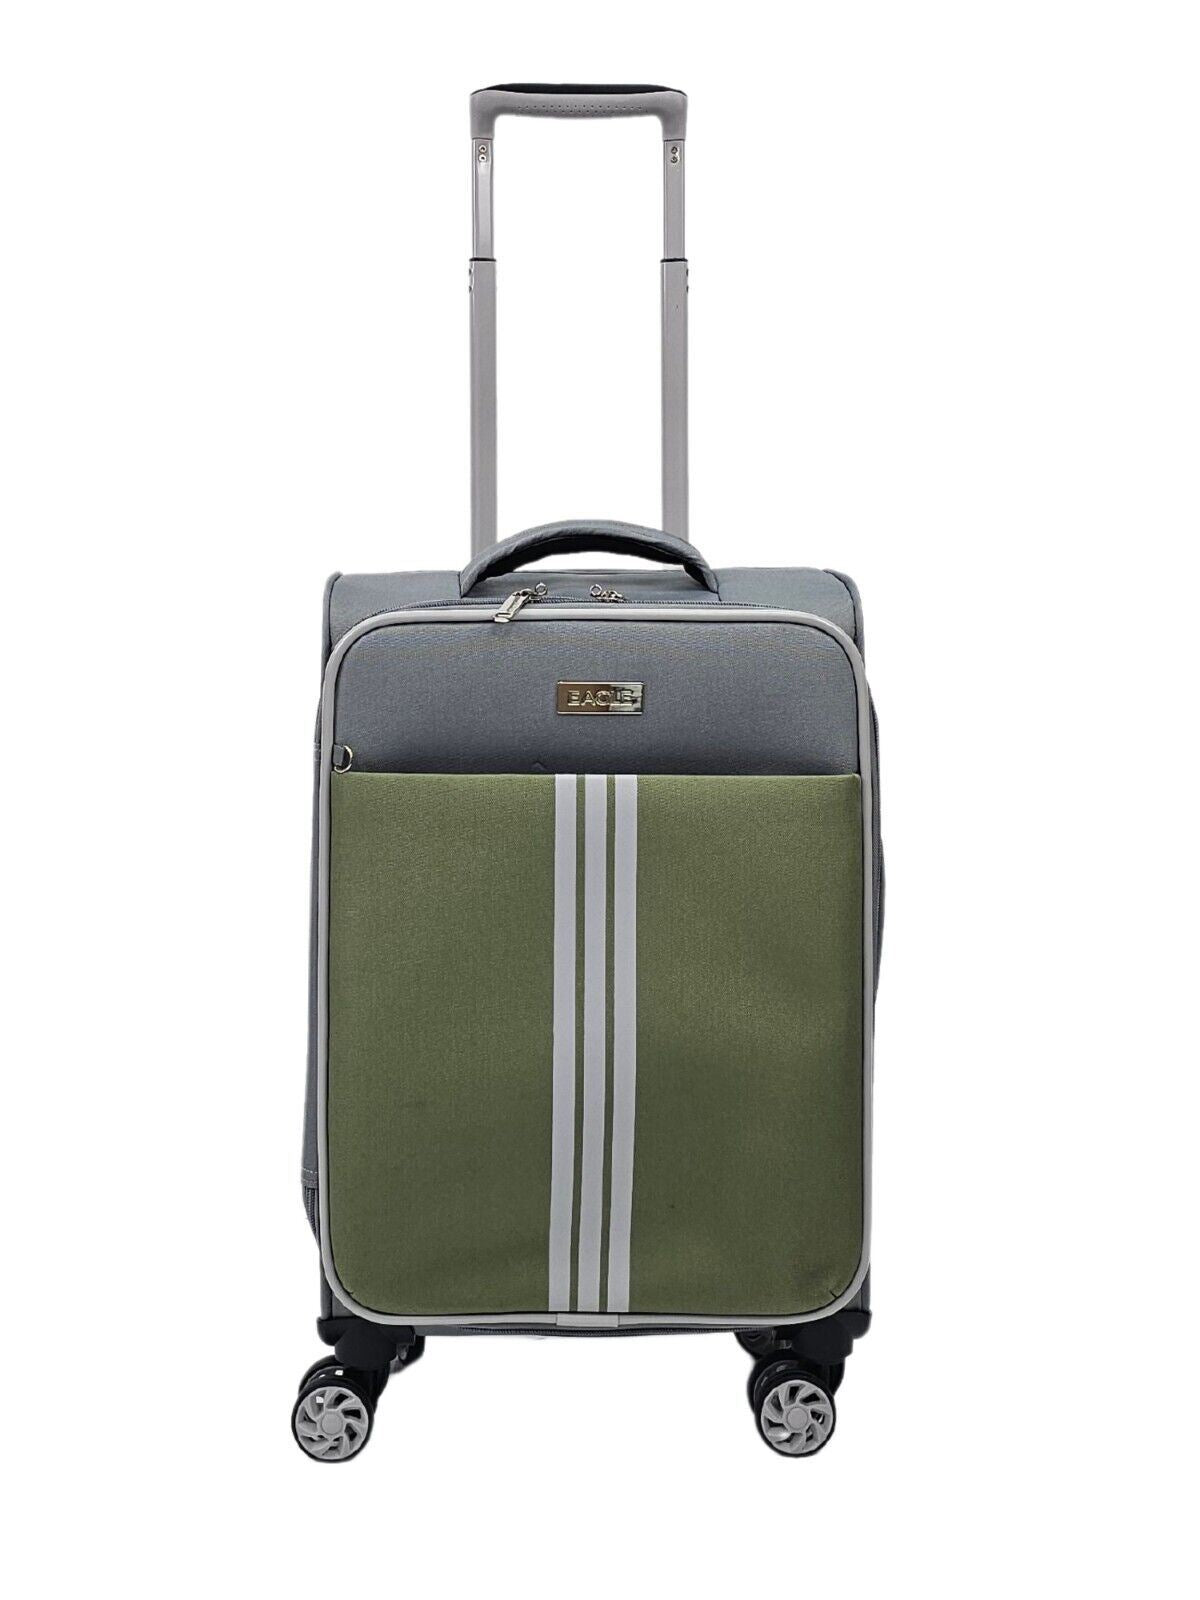 Lightweight Grey Cabin Suitcases 4 Wheel Luggage Travel Bag - Upperclass Fashions 